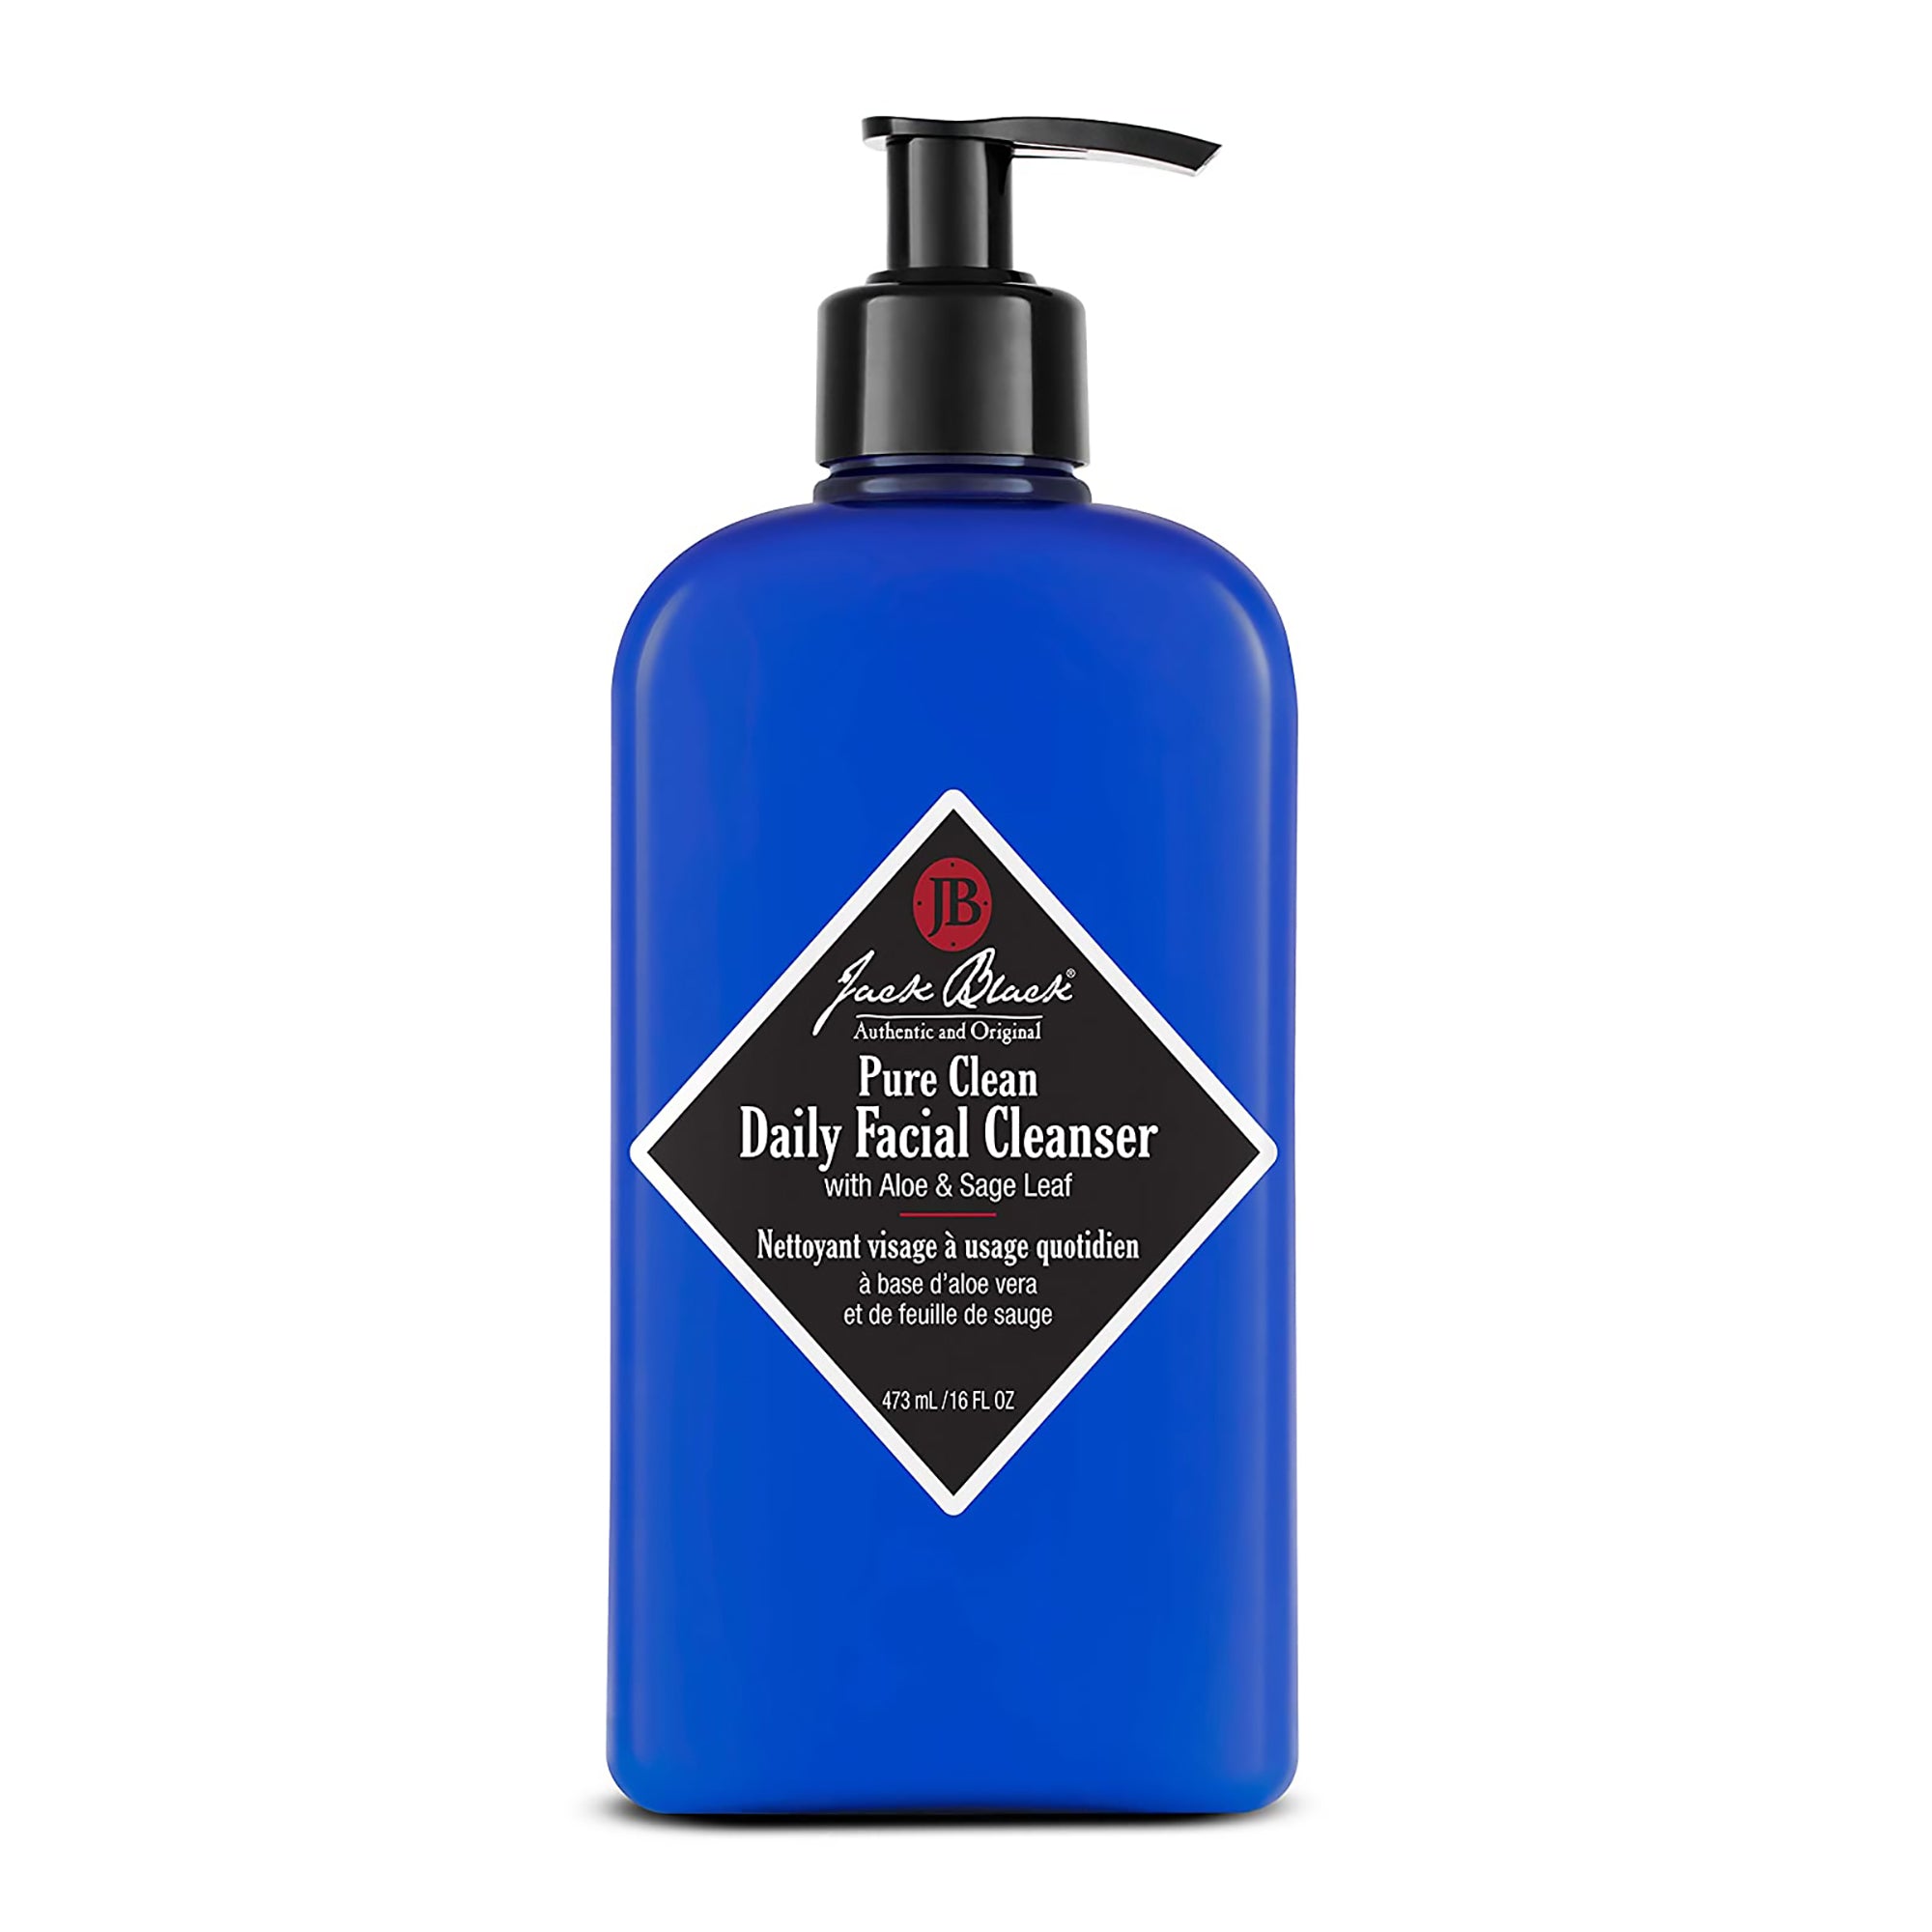 Jack Black Pure Clean Daily Facial Cleanser / 16OZ